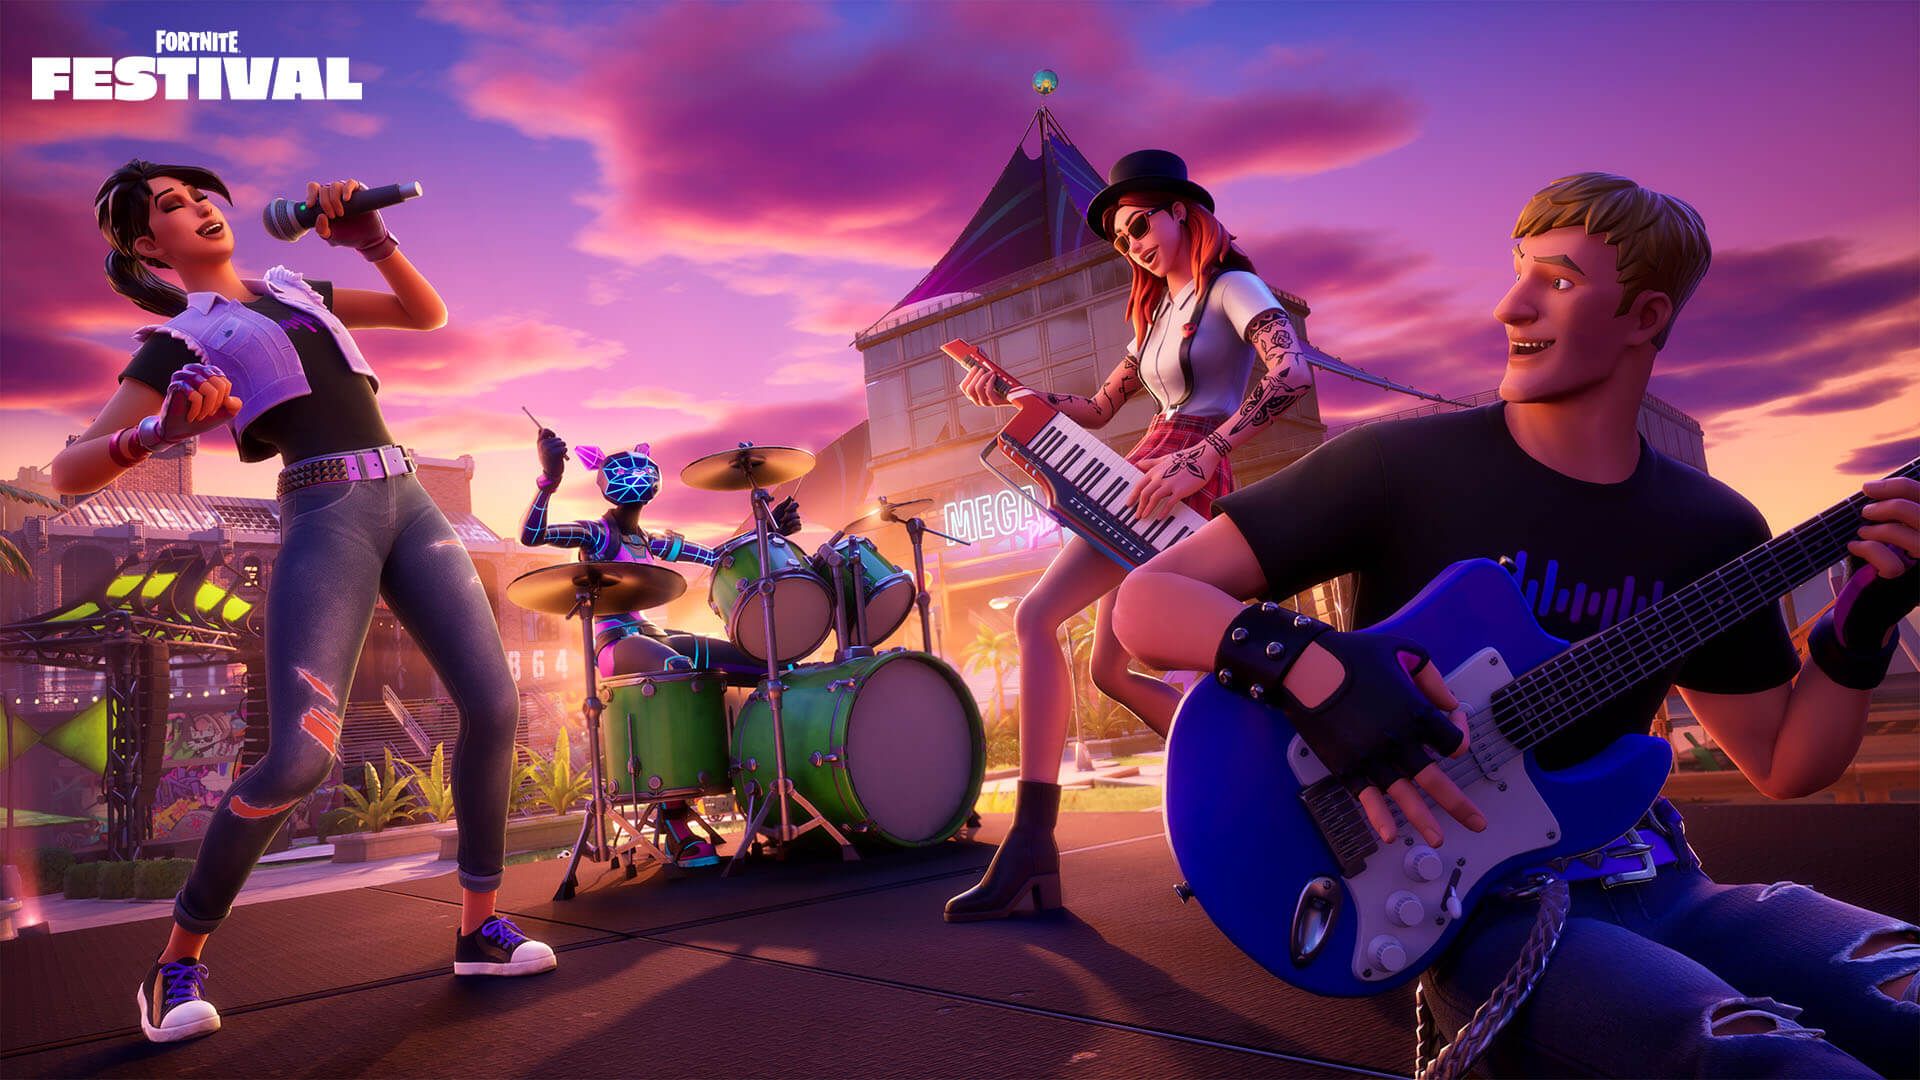 Fortnite Festival Brings Rock Band To A Whole New Generation